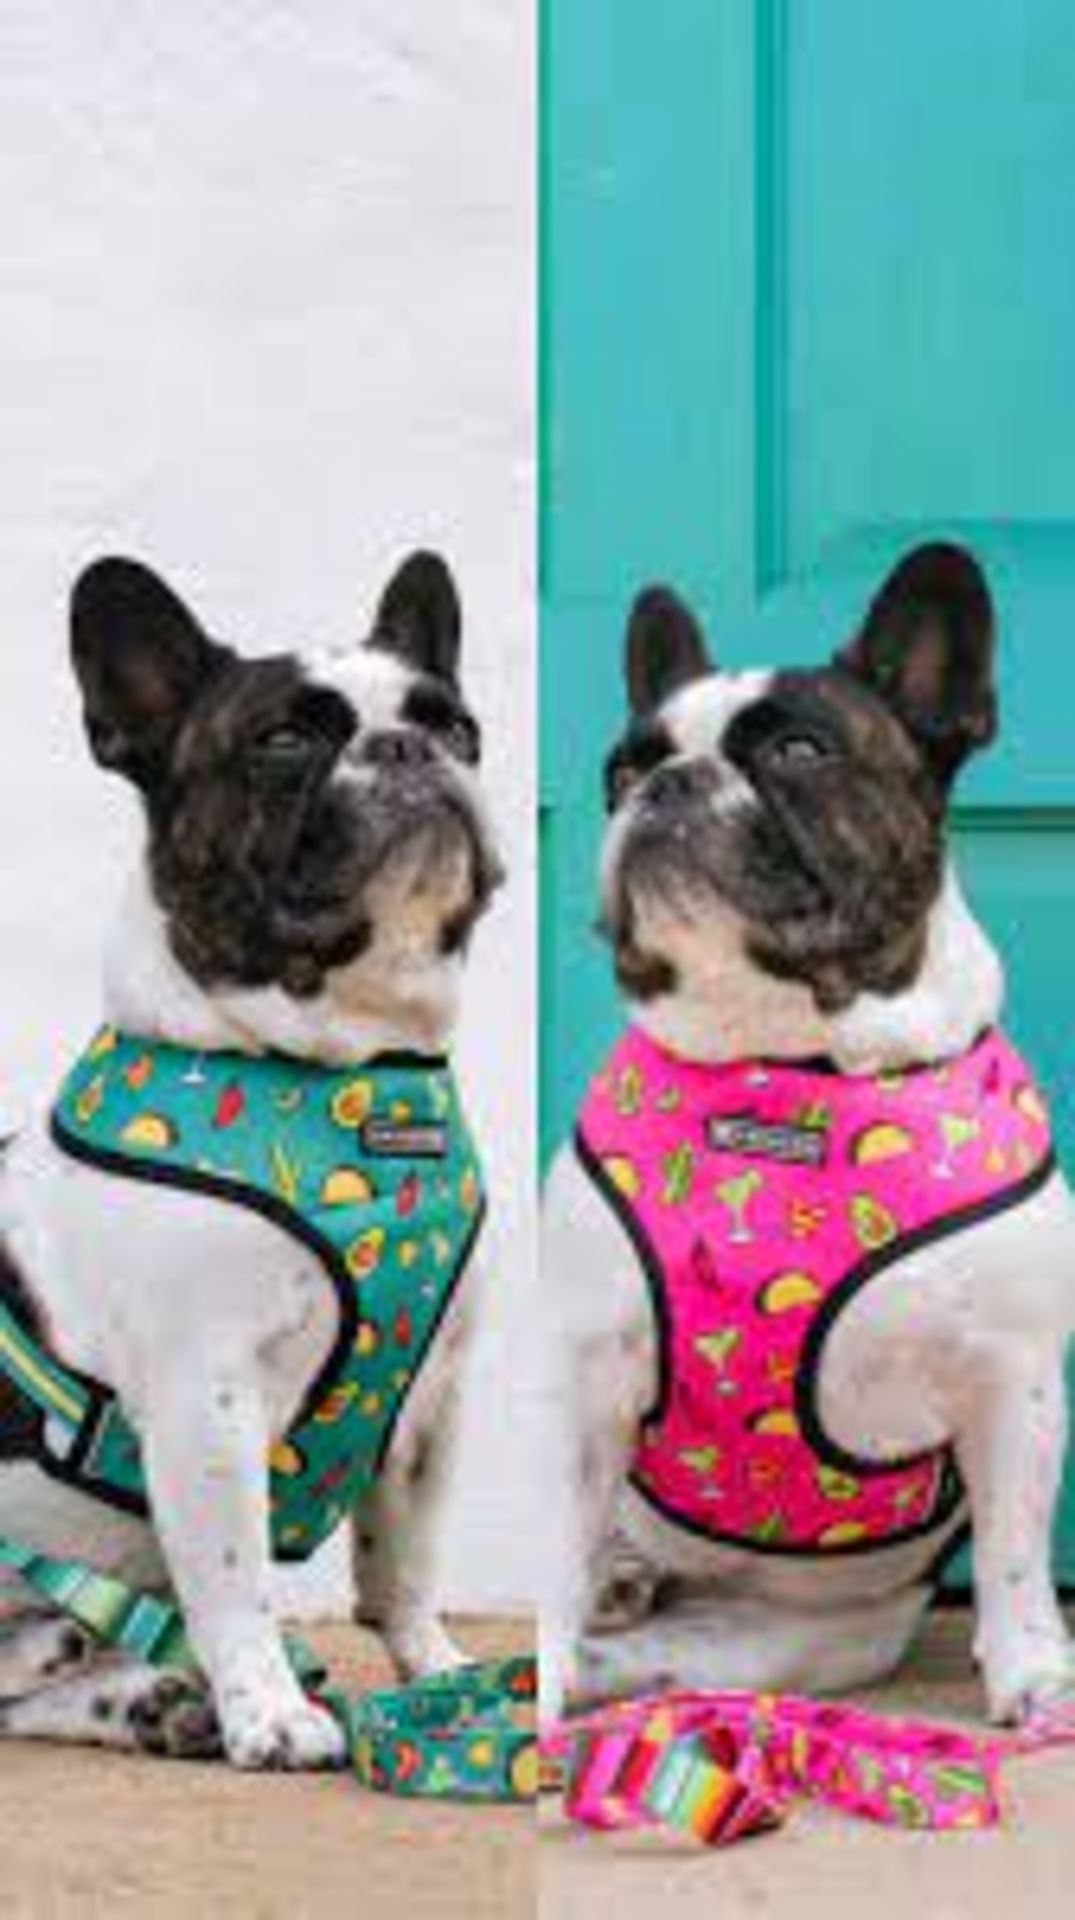 Trade Lot 100 X New .Packaged Frenchie The Bulldog Luxury Branded Dog Products. May include items - Image 45 of 50